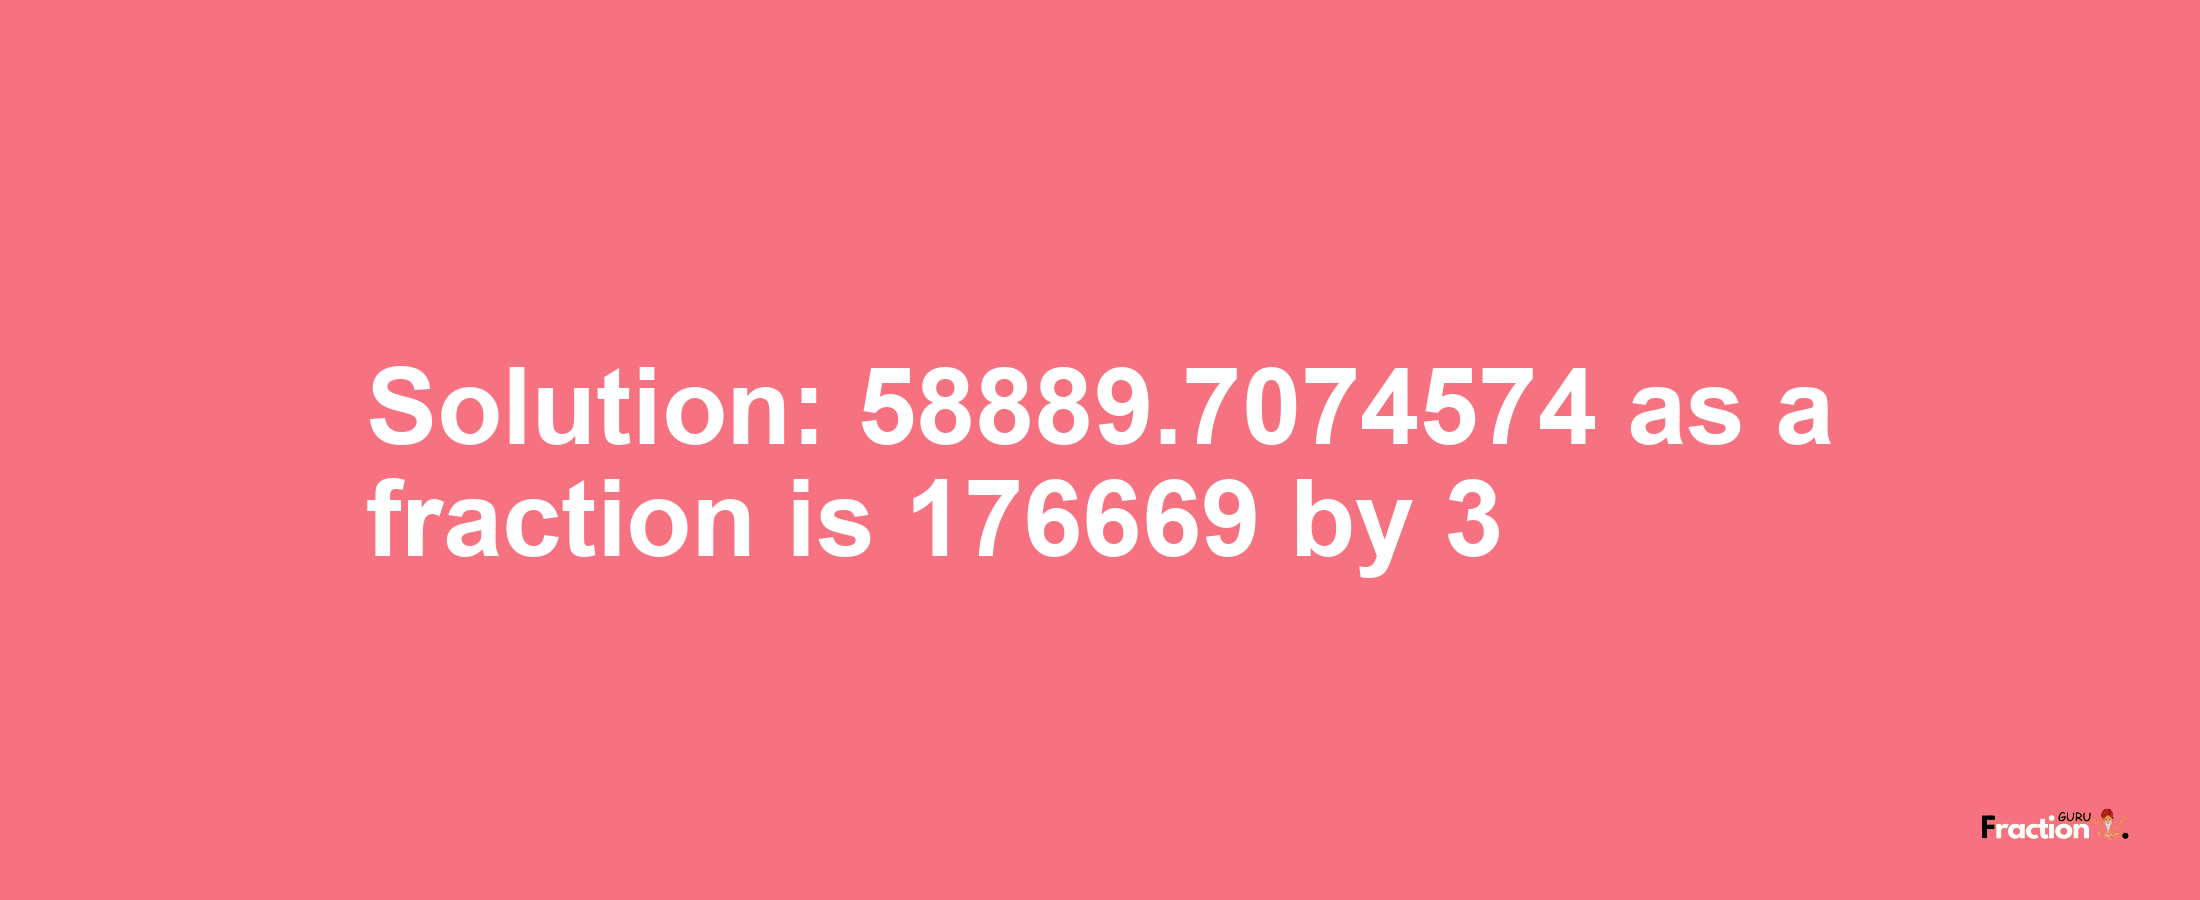 Solution:58889.7074574 as a fraction is 176669/3